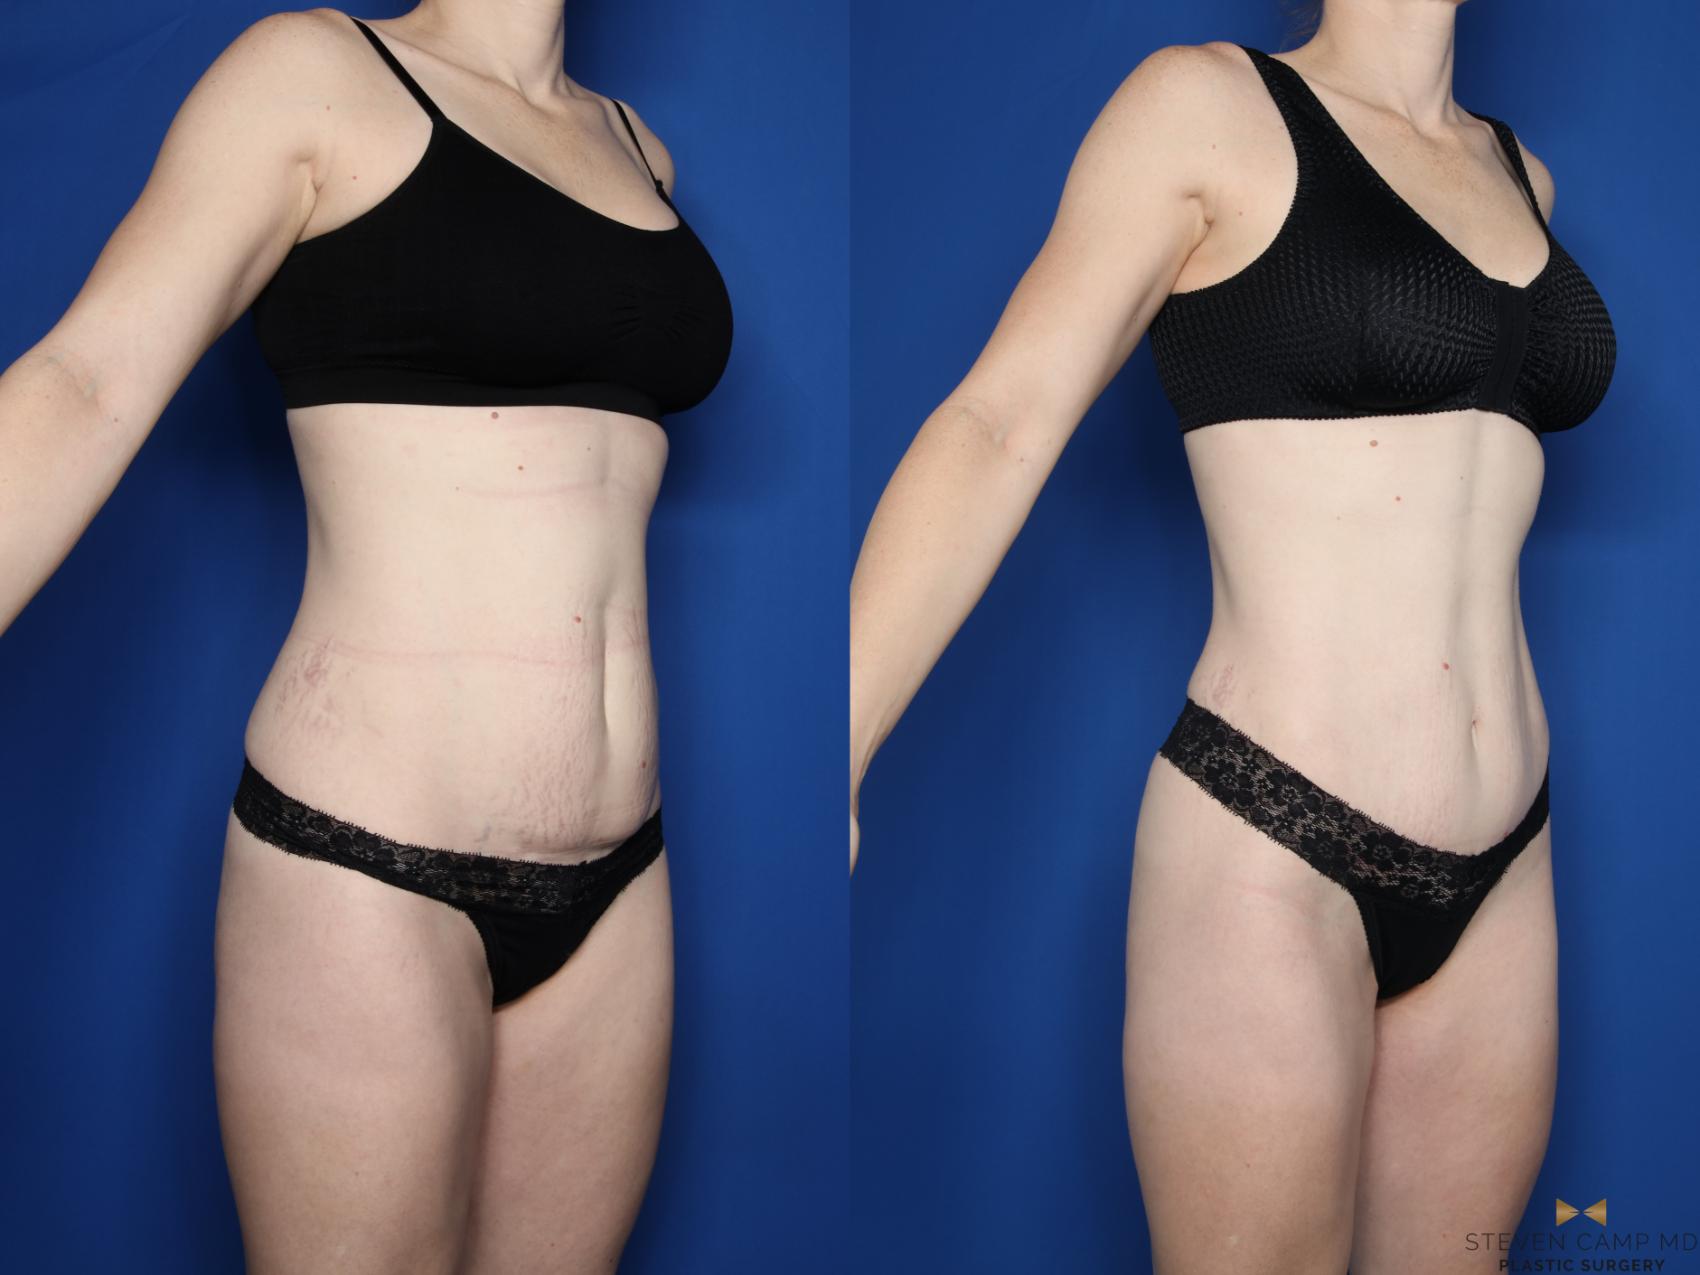 Mini Tummy Tuck: Is It Right for You? - Camille Cash, M.D.